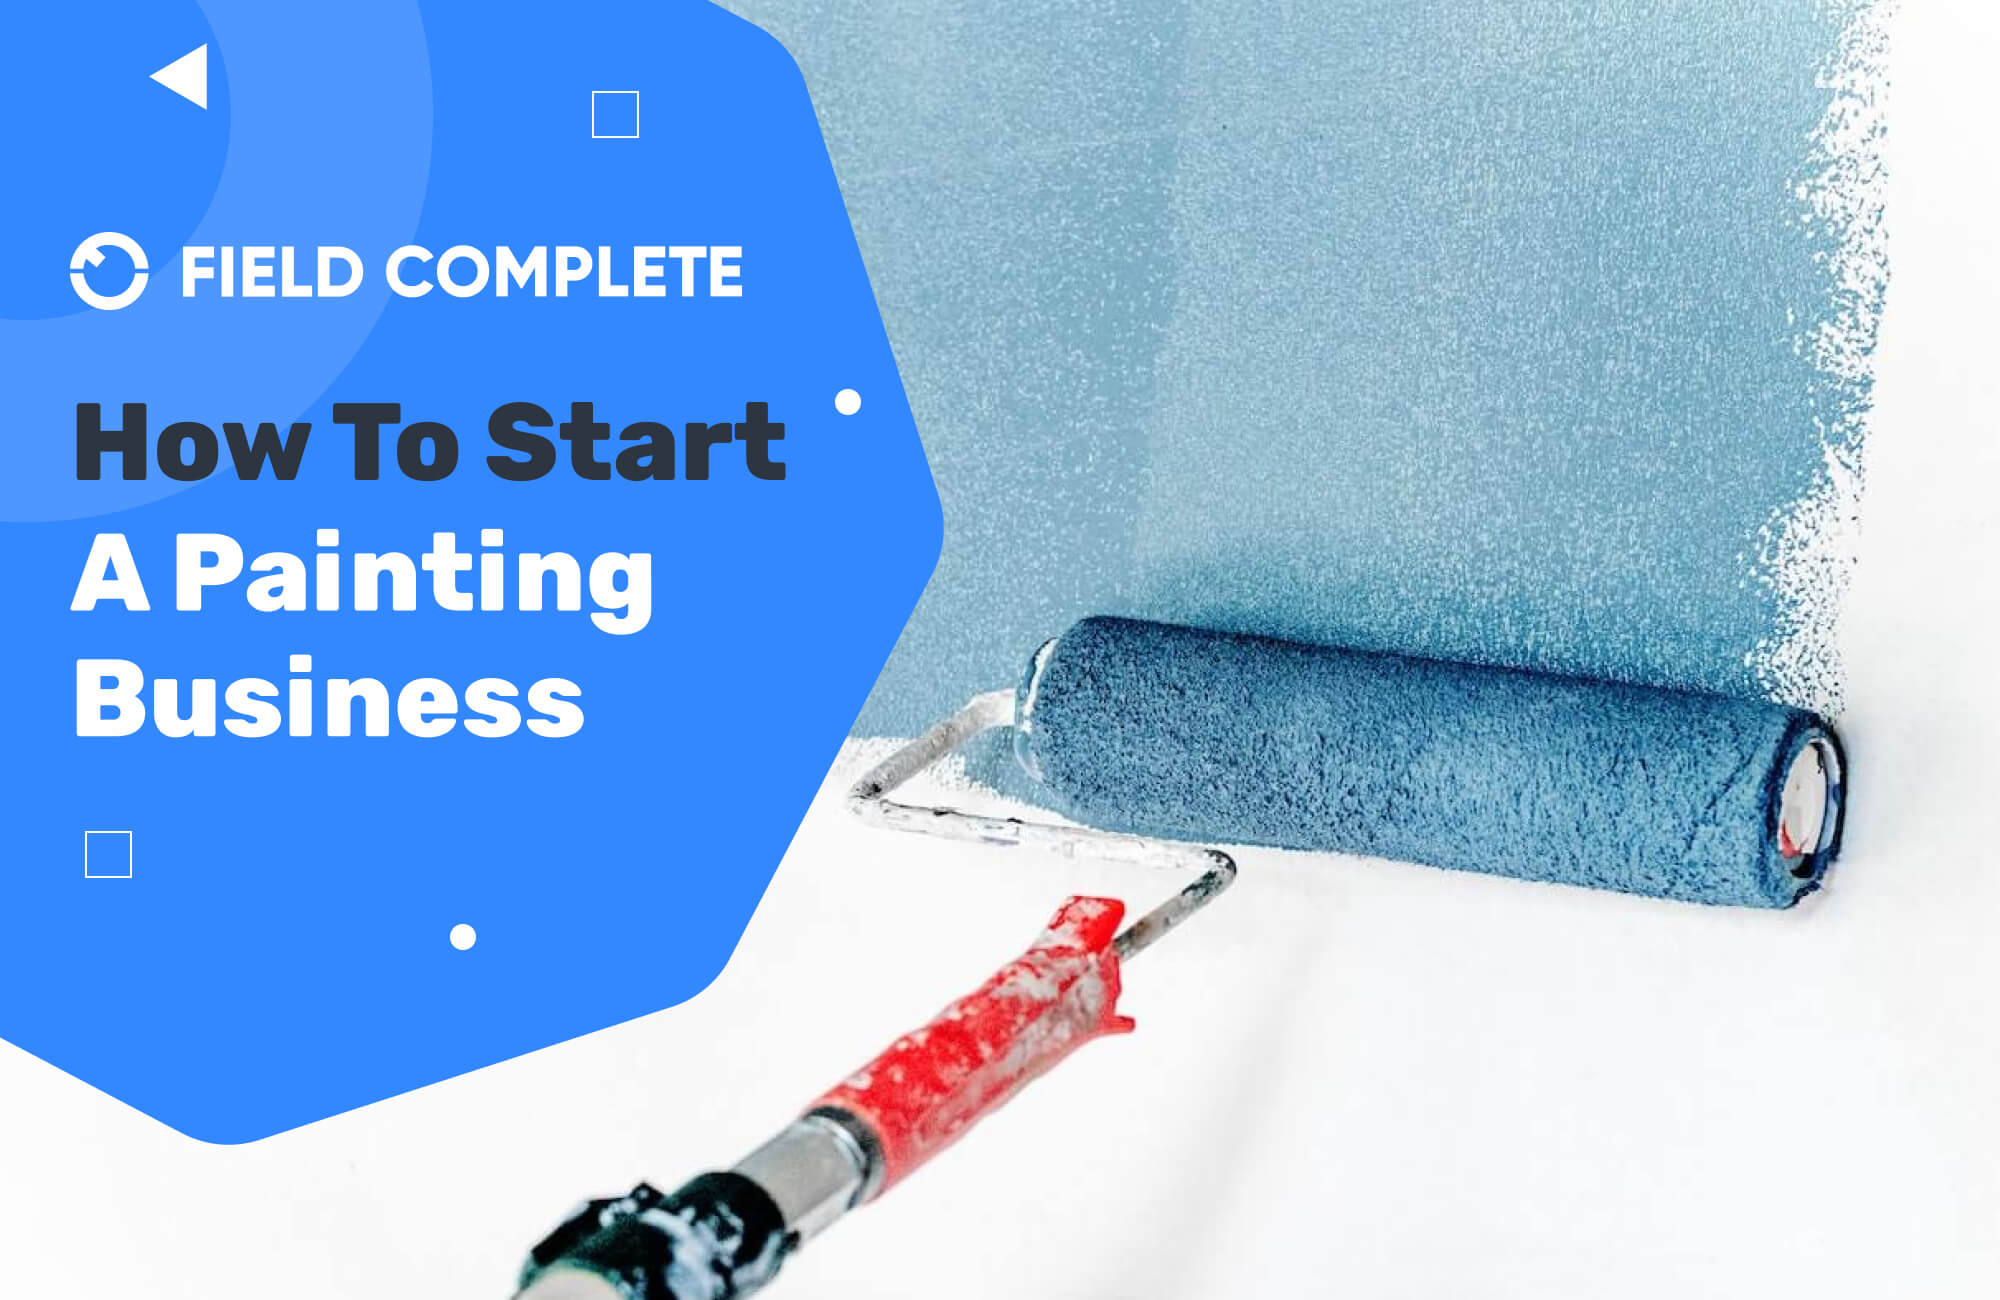 How To Start A Painting Business